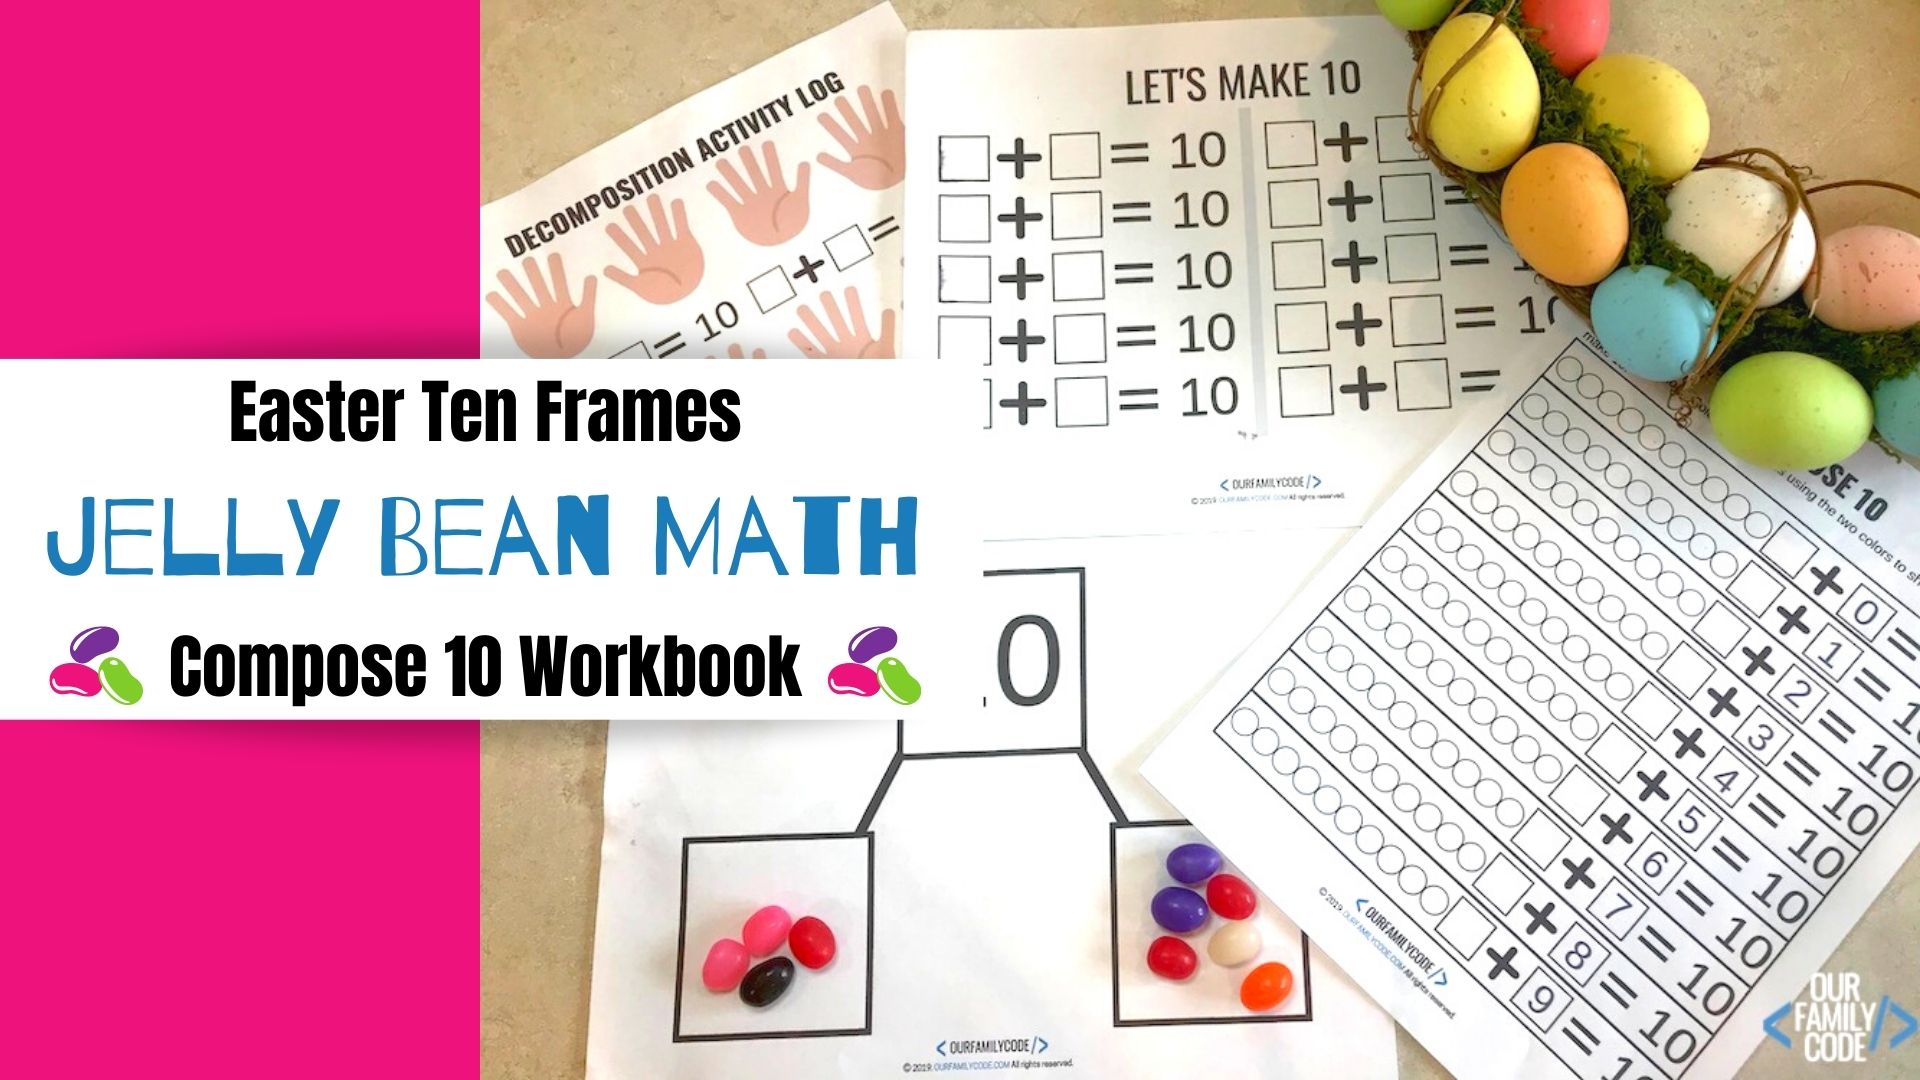 A picture of jelly bean math workbook.